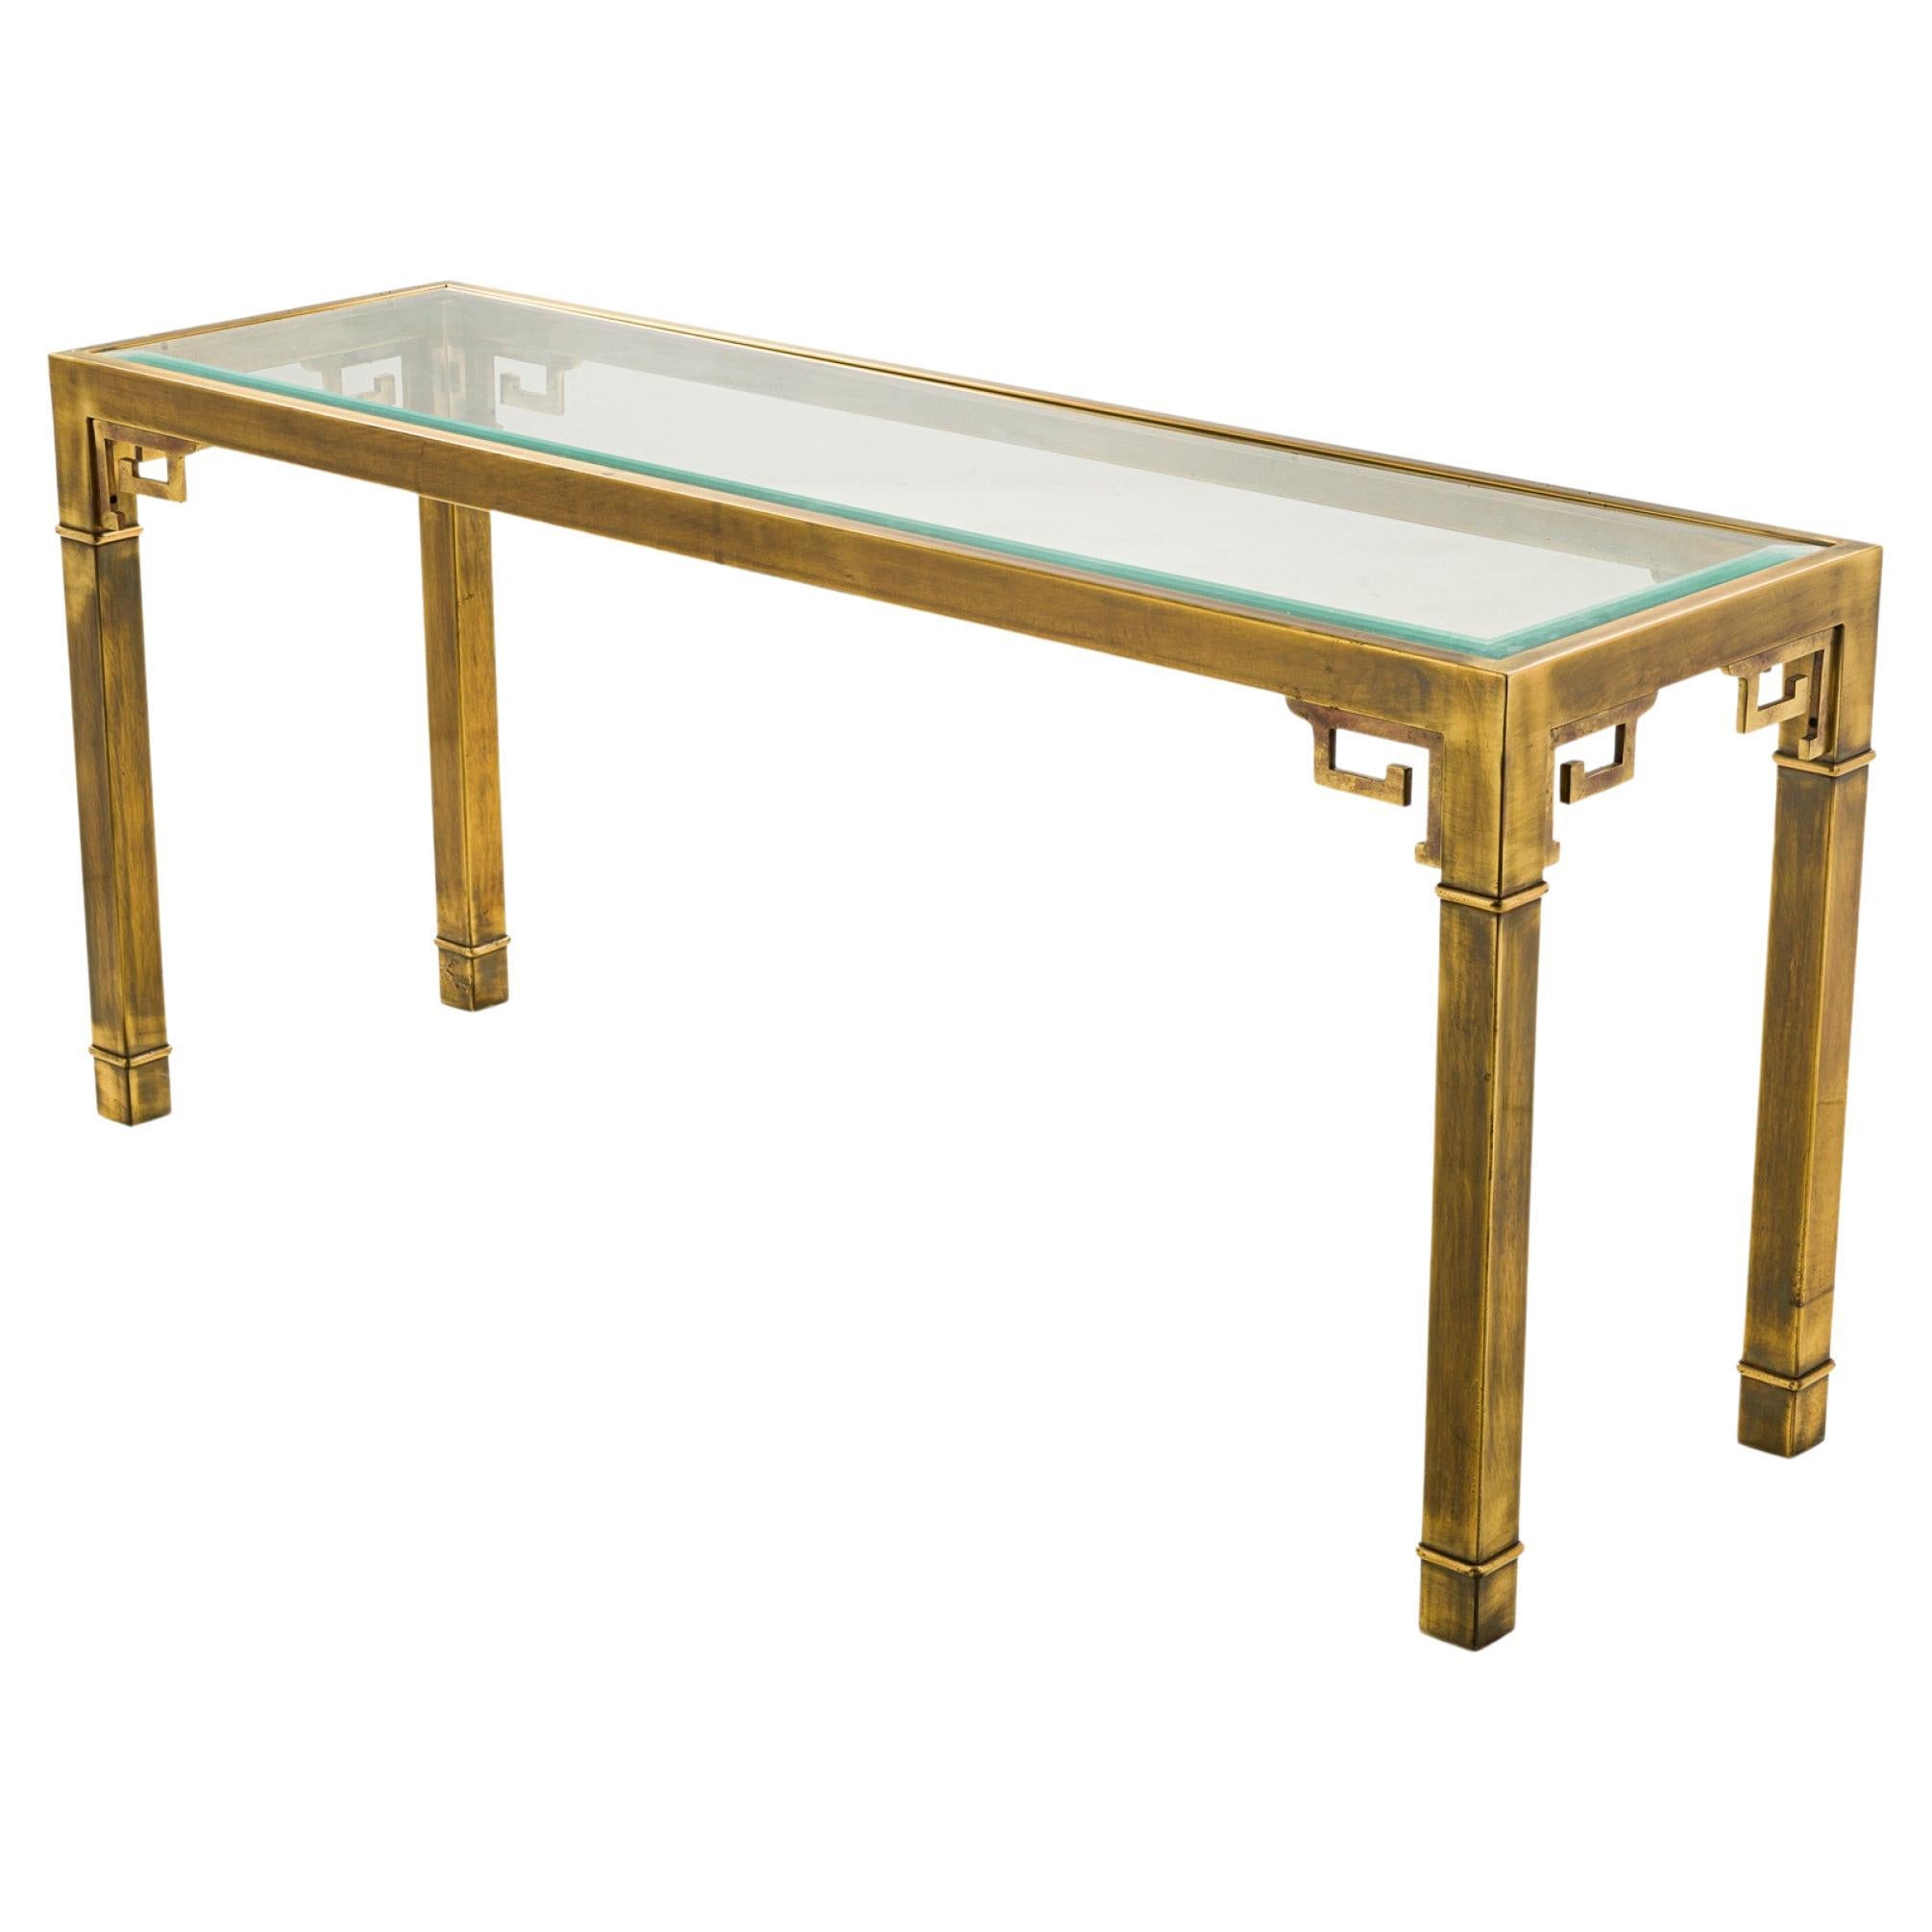 Mastercraft Greek Key Design Antiqued Brass and Glass Console Table